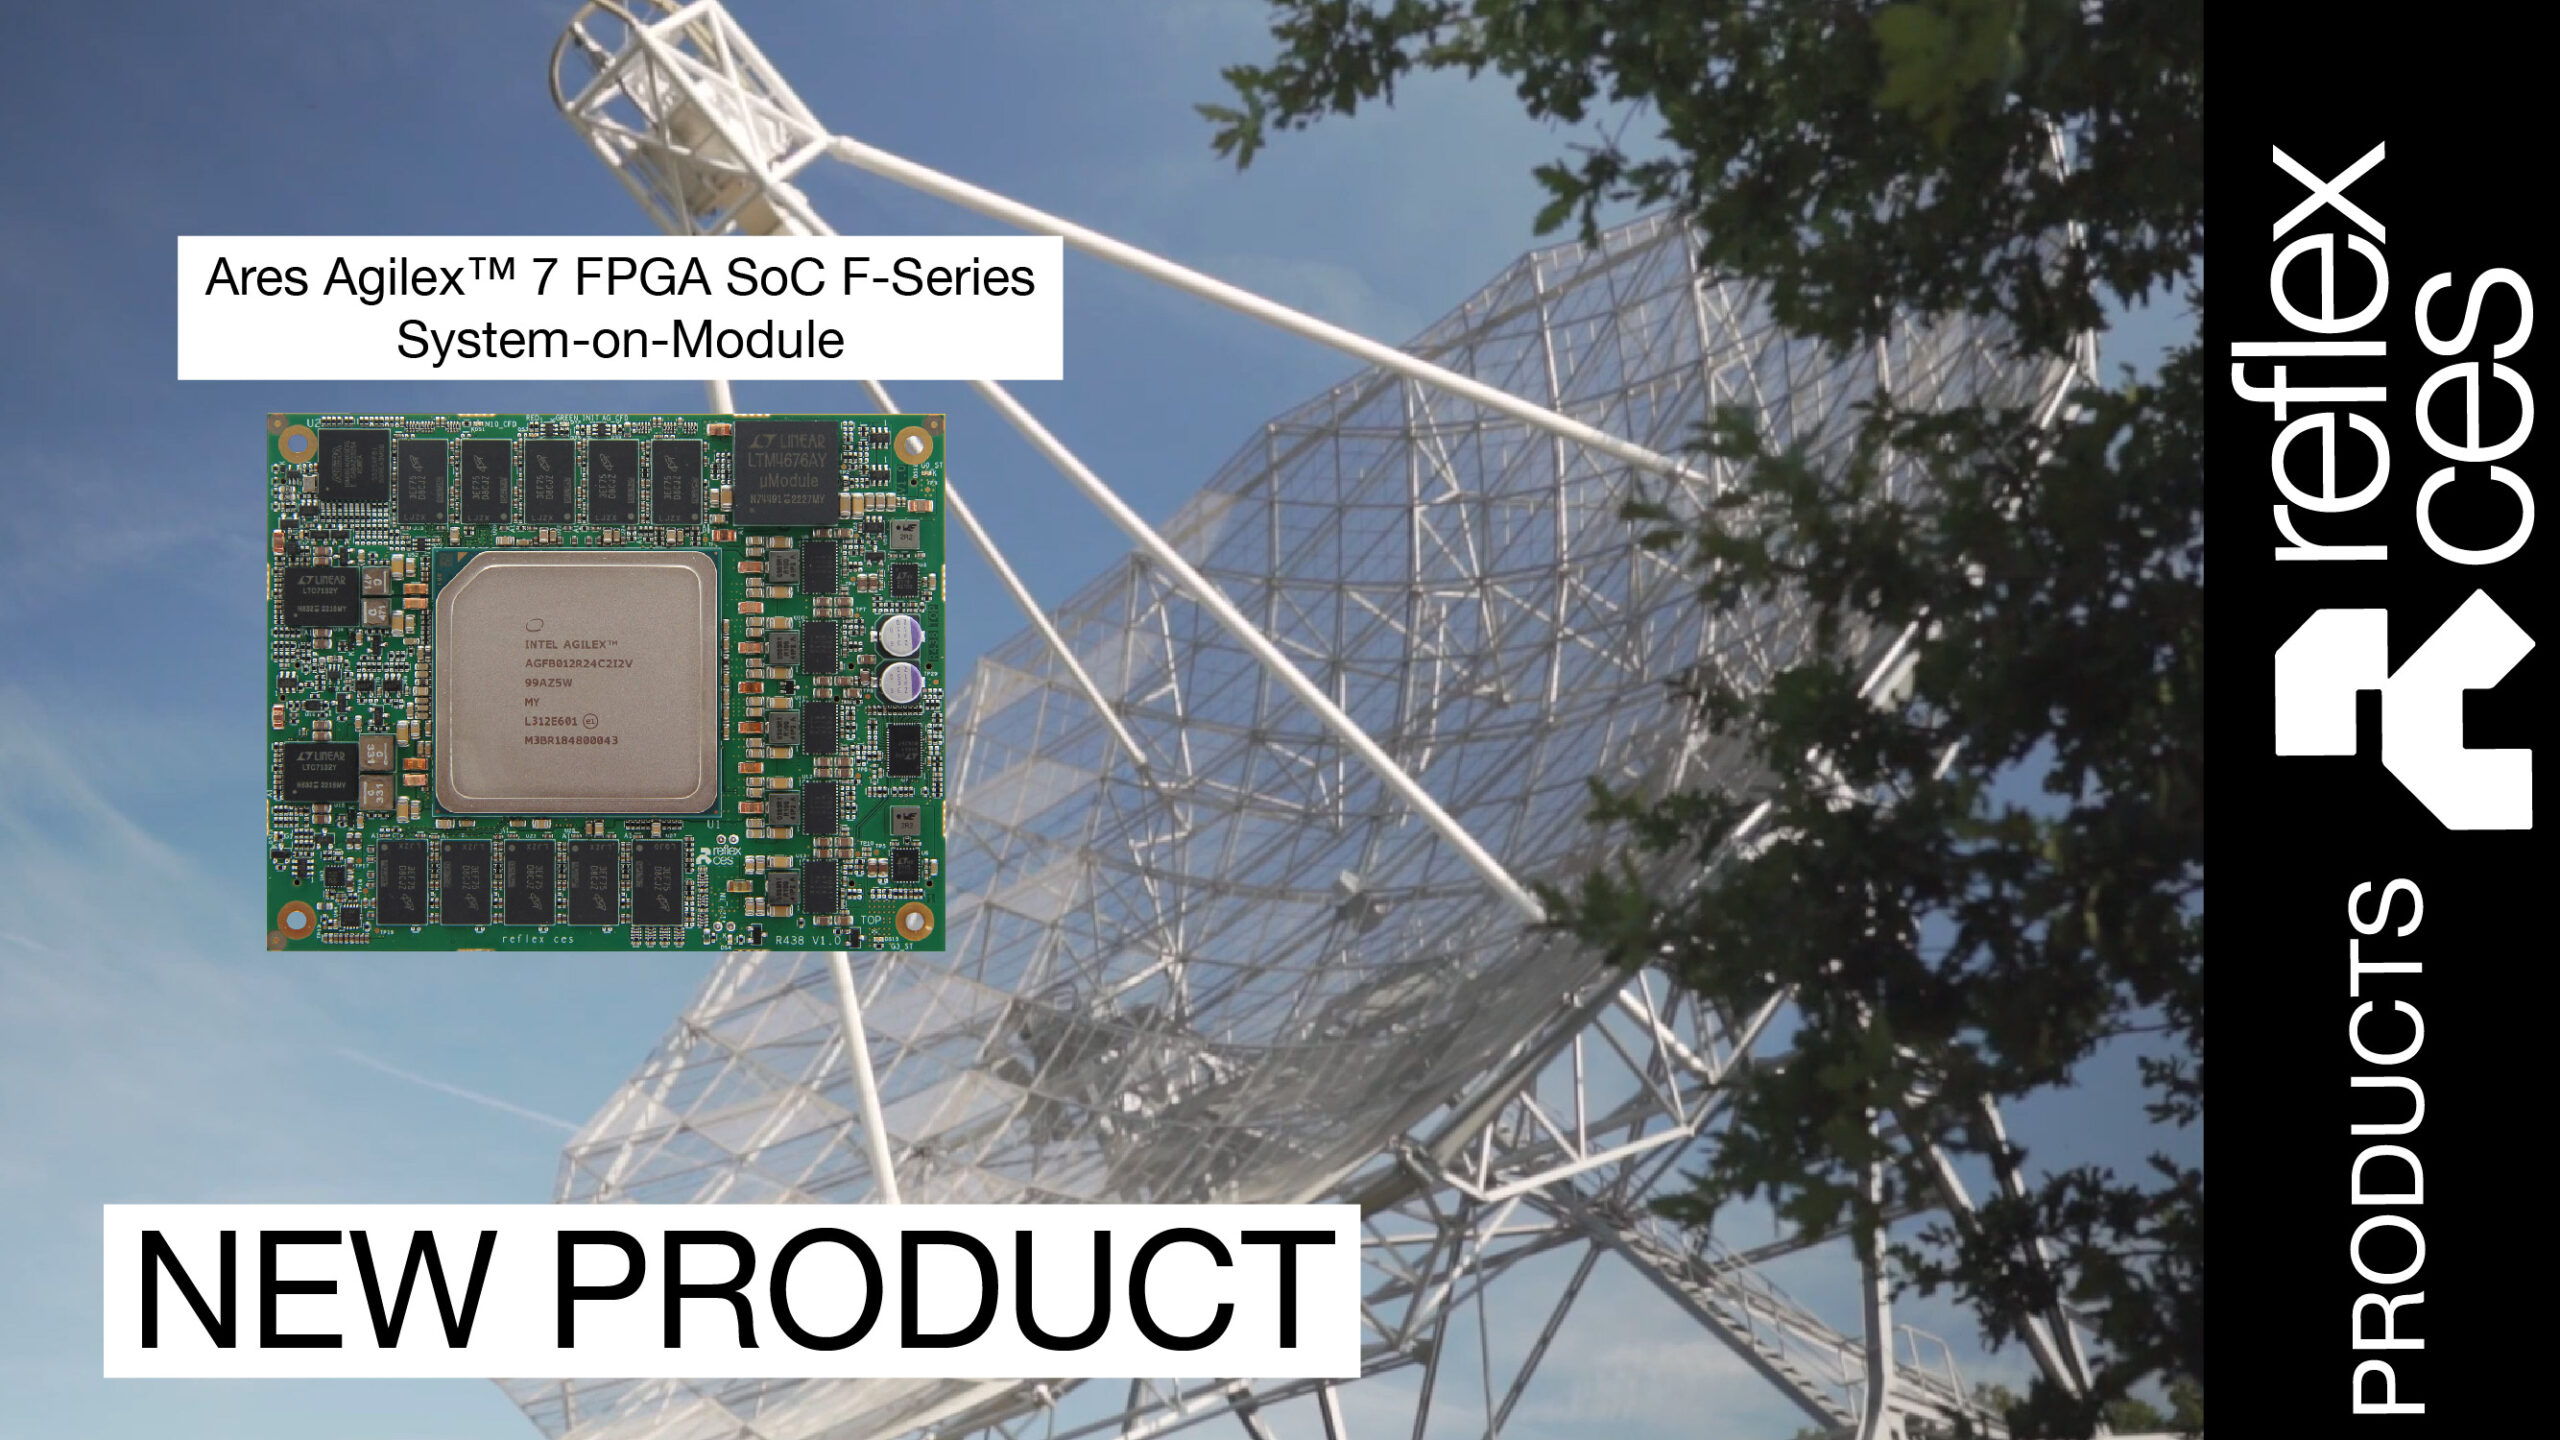 [ VIDEO ] NEW PRODUCT | Introduction to the Ares module based on an Agilex™ 7 SoC F-Series FPGA, by reflex ces